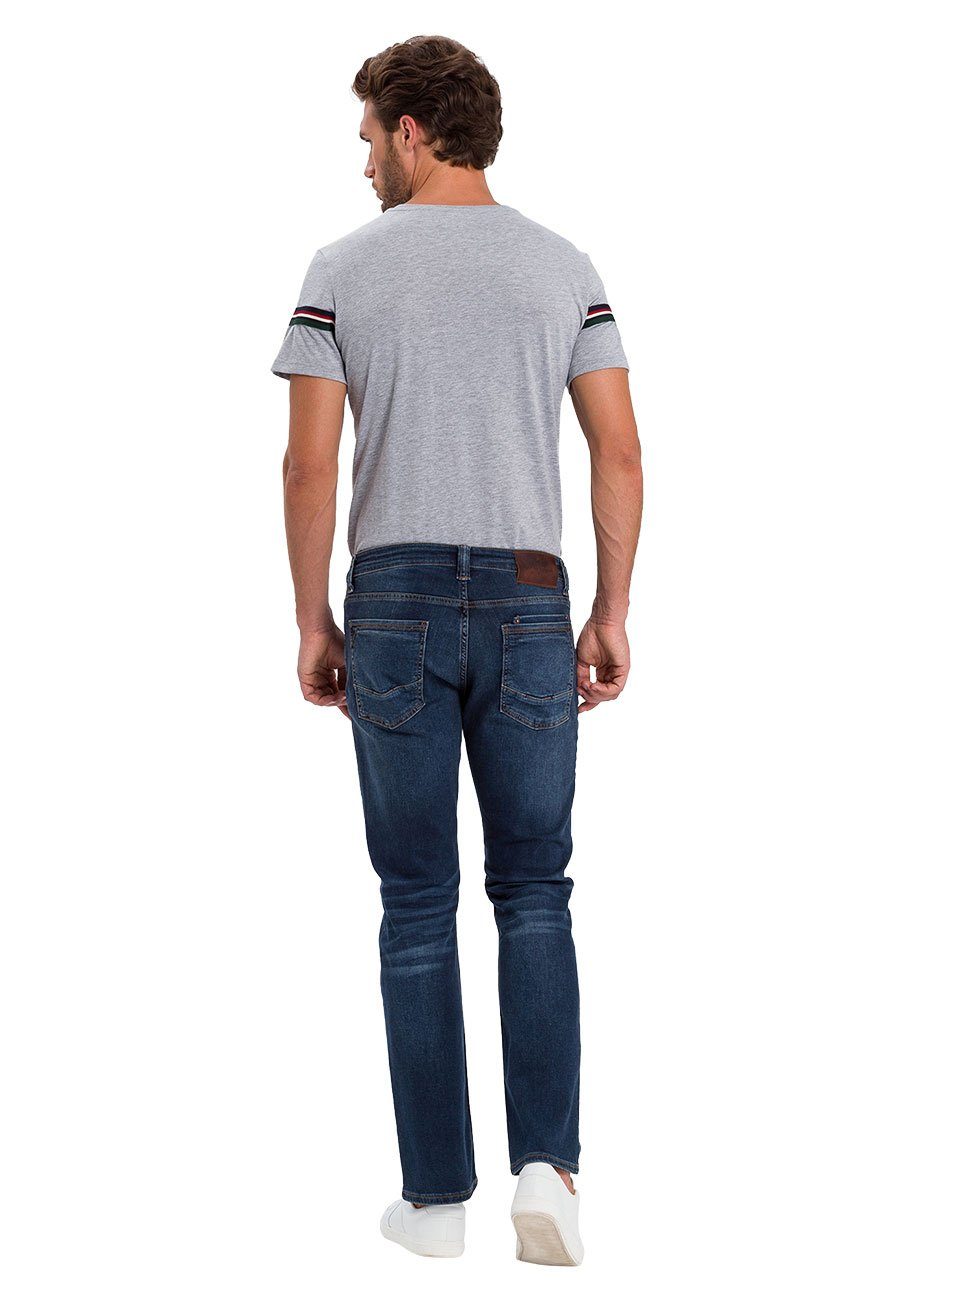 Dylan mit Straight-Jeans JEANS® Jeanshose Stretch CROSS